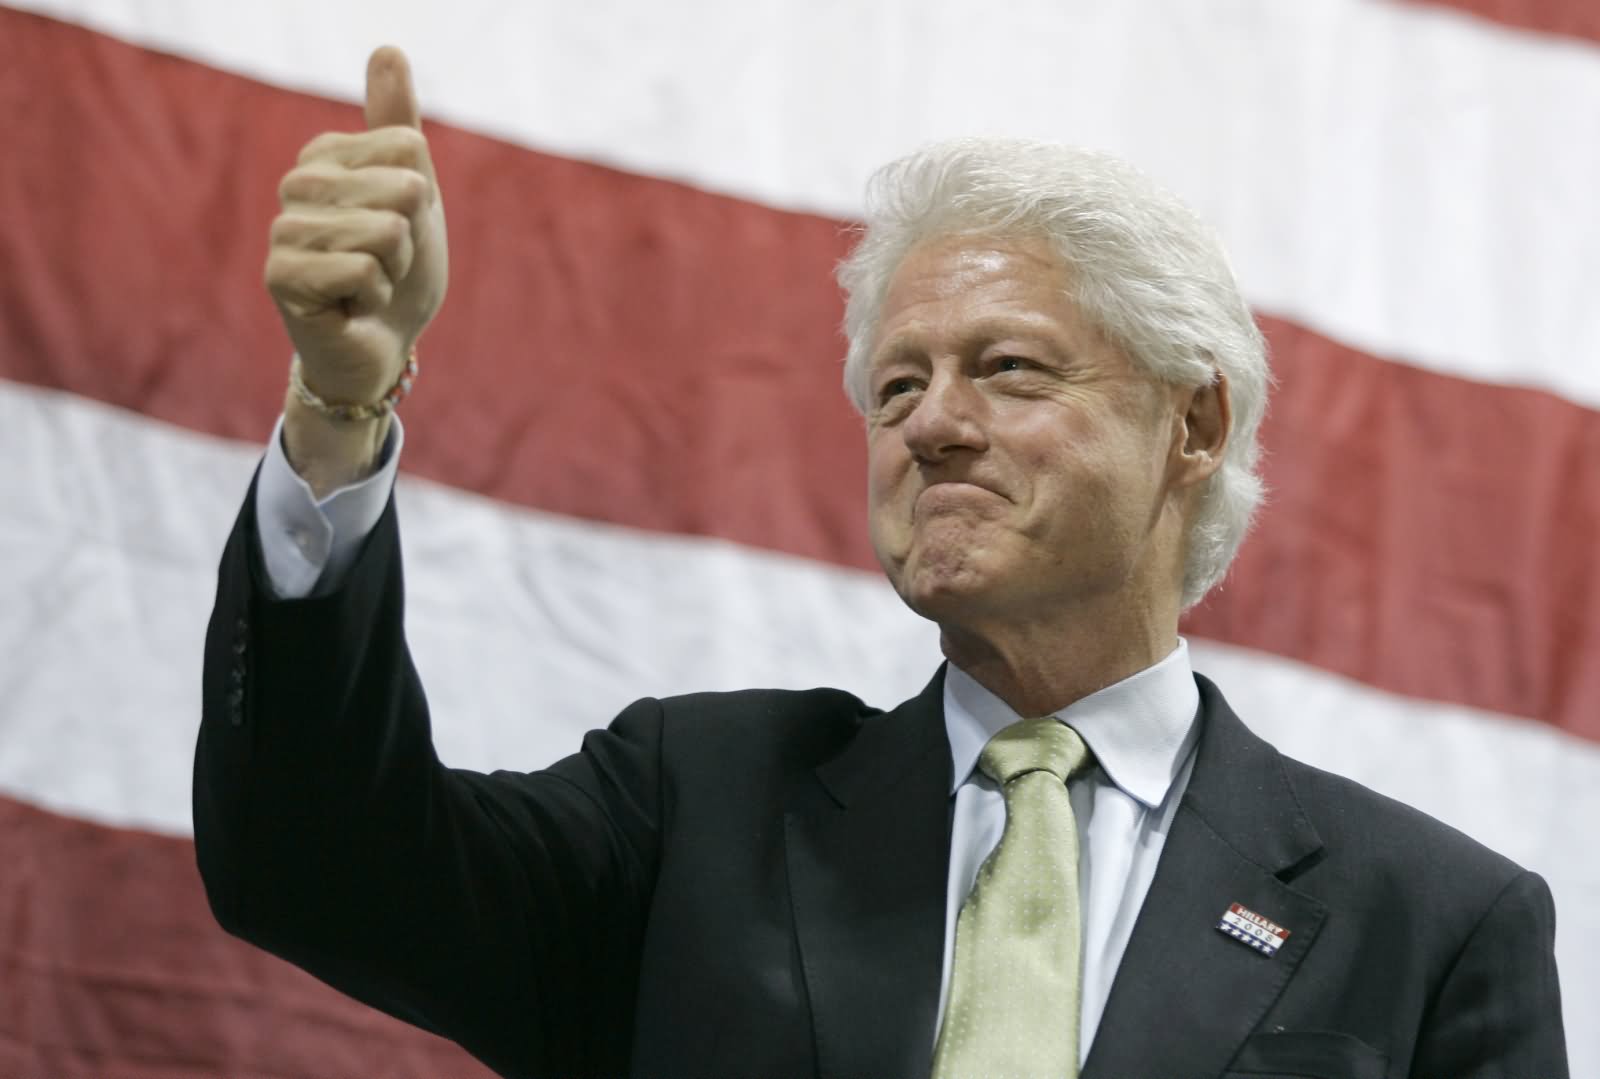 Smiling-Face-Bill-Clinton-Showing-Thumb-Very-Funny-Photo.jpg